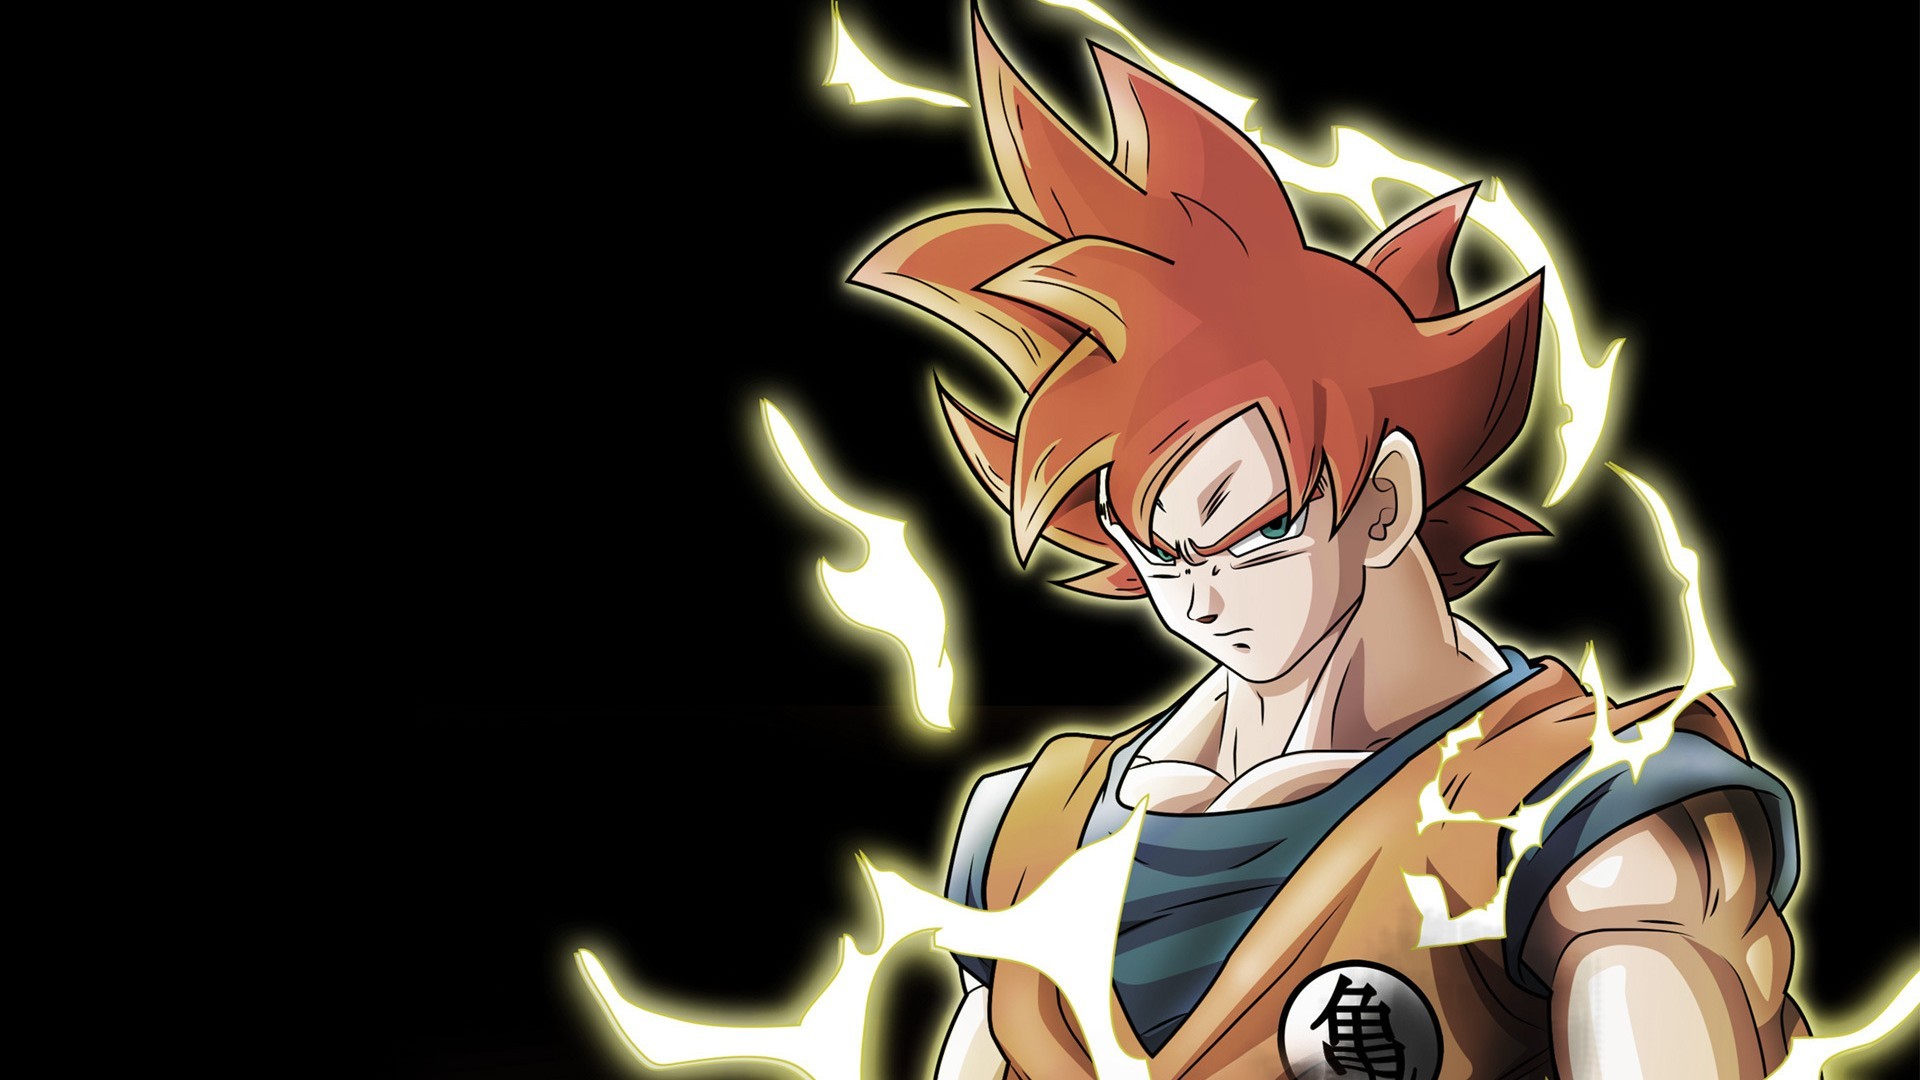 Goku Super Saiyan God HD Backgrounds With Resolution 1920X1080 pixel. You can make this wallpaper for your Desktop Computer Backgrounds, Mac Wallpapers, Android Lock screen or iPhone Screensavers